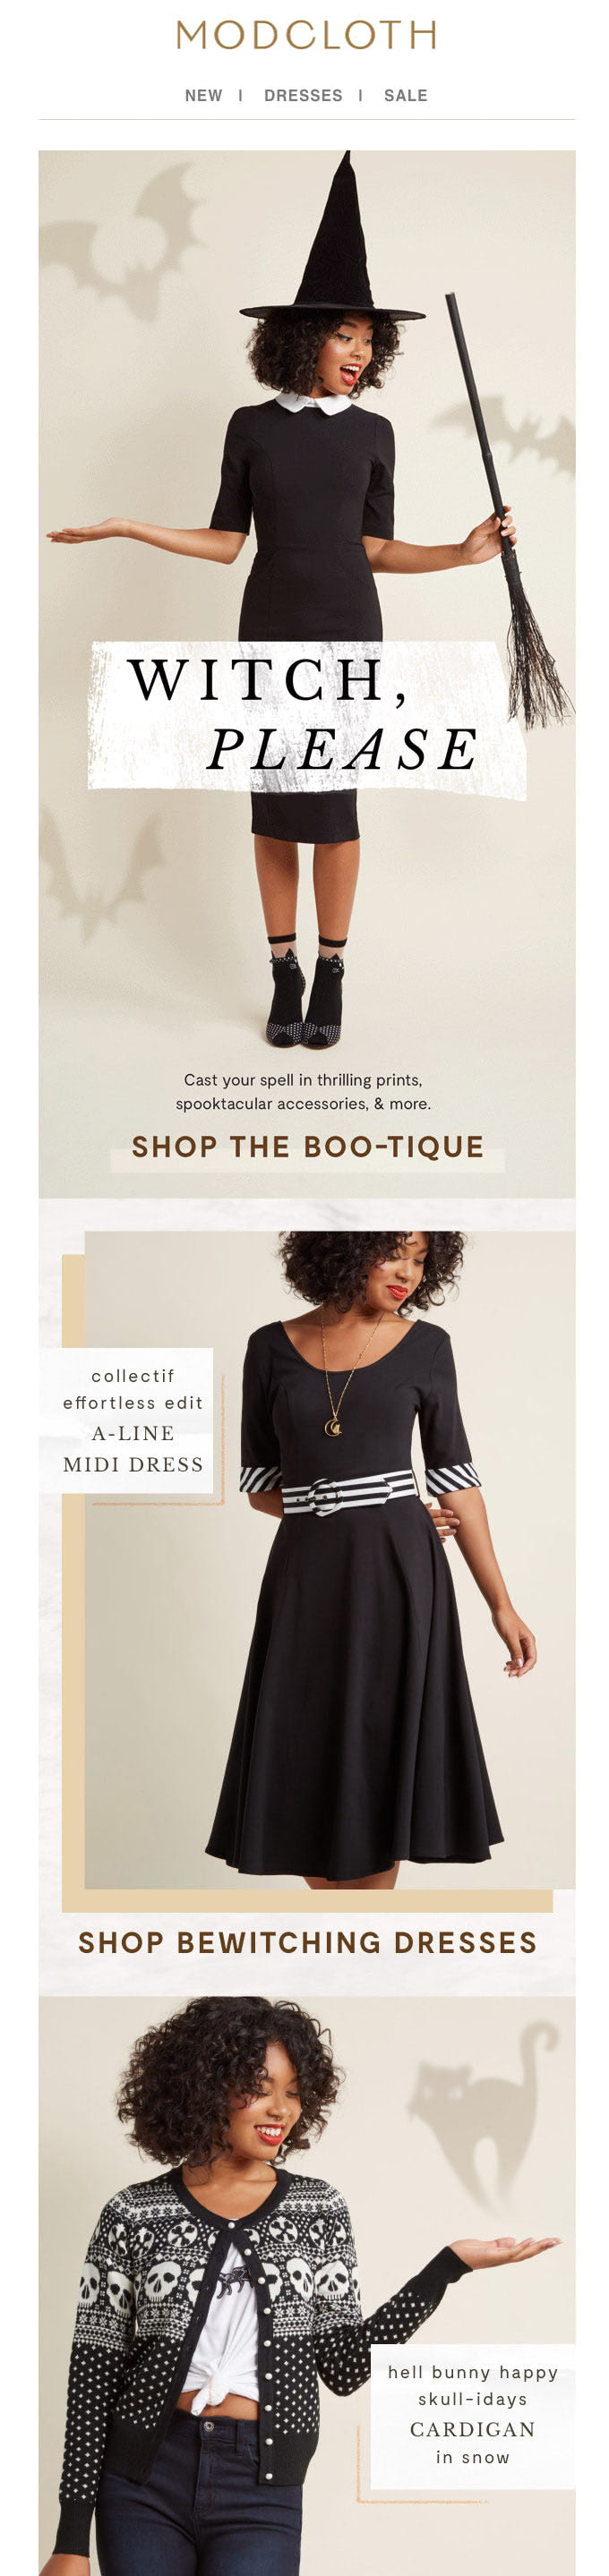 Halloween newsletter from ModCloth